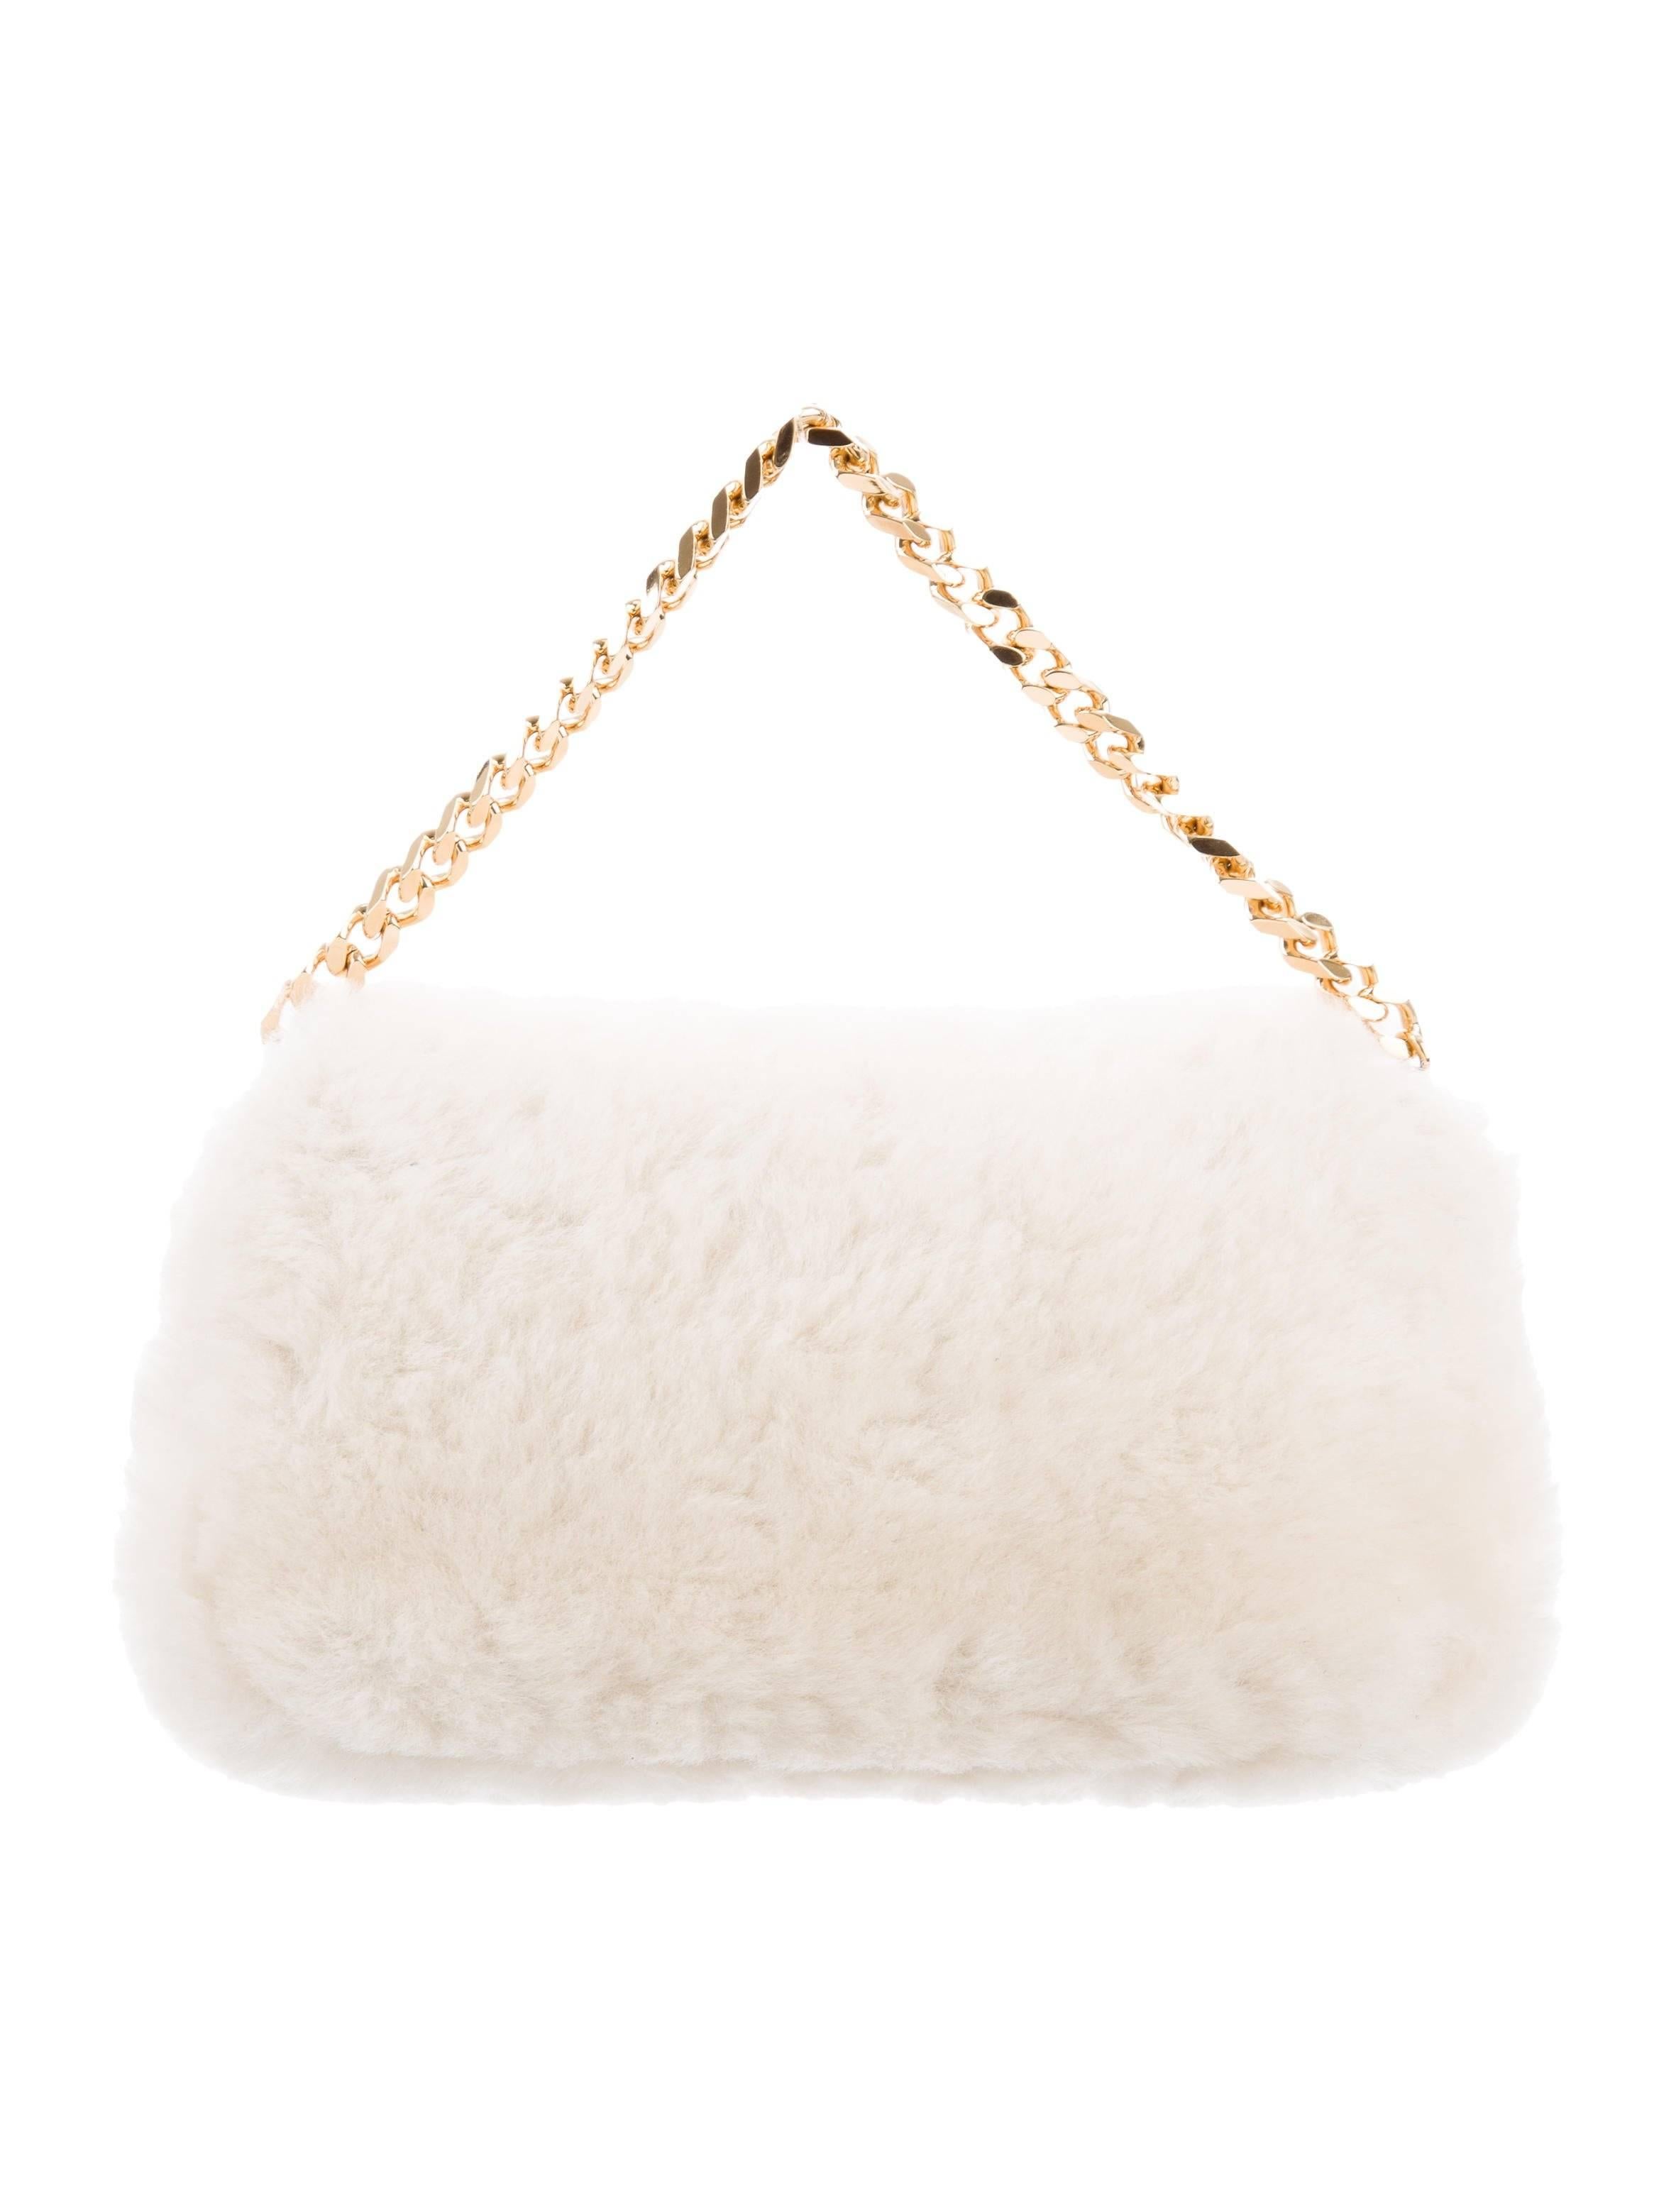 Fendi NEW Winter White Fur Gold 2 in 1 Clutch Evening Handle Chain Flap Bag

Shearling fur 
Leather trim
Gold tone hardware
Suede lining 
Made in Italy
Chain drop 3